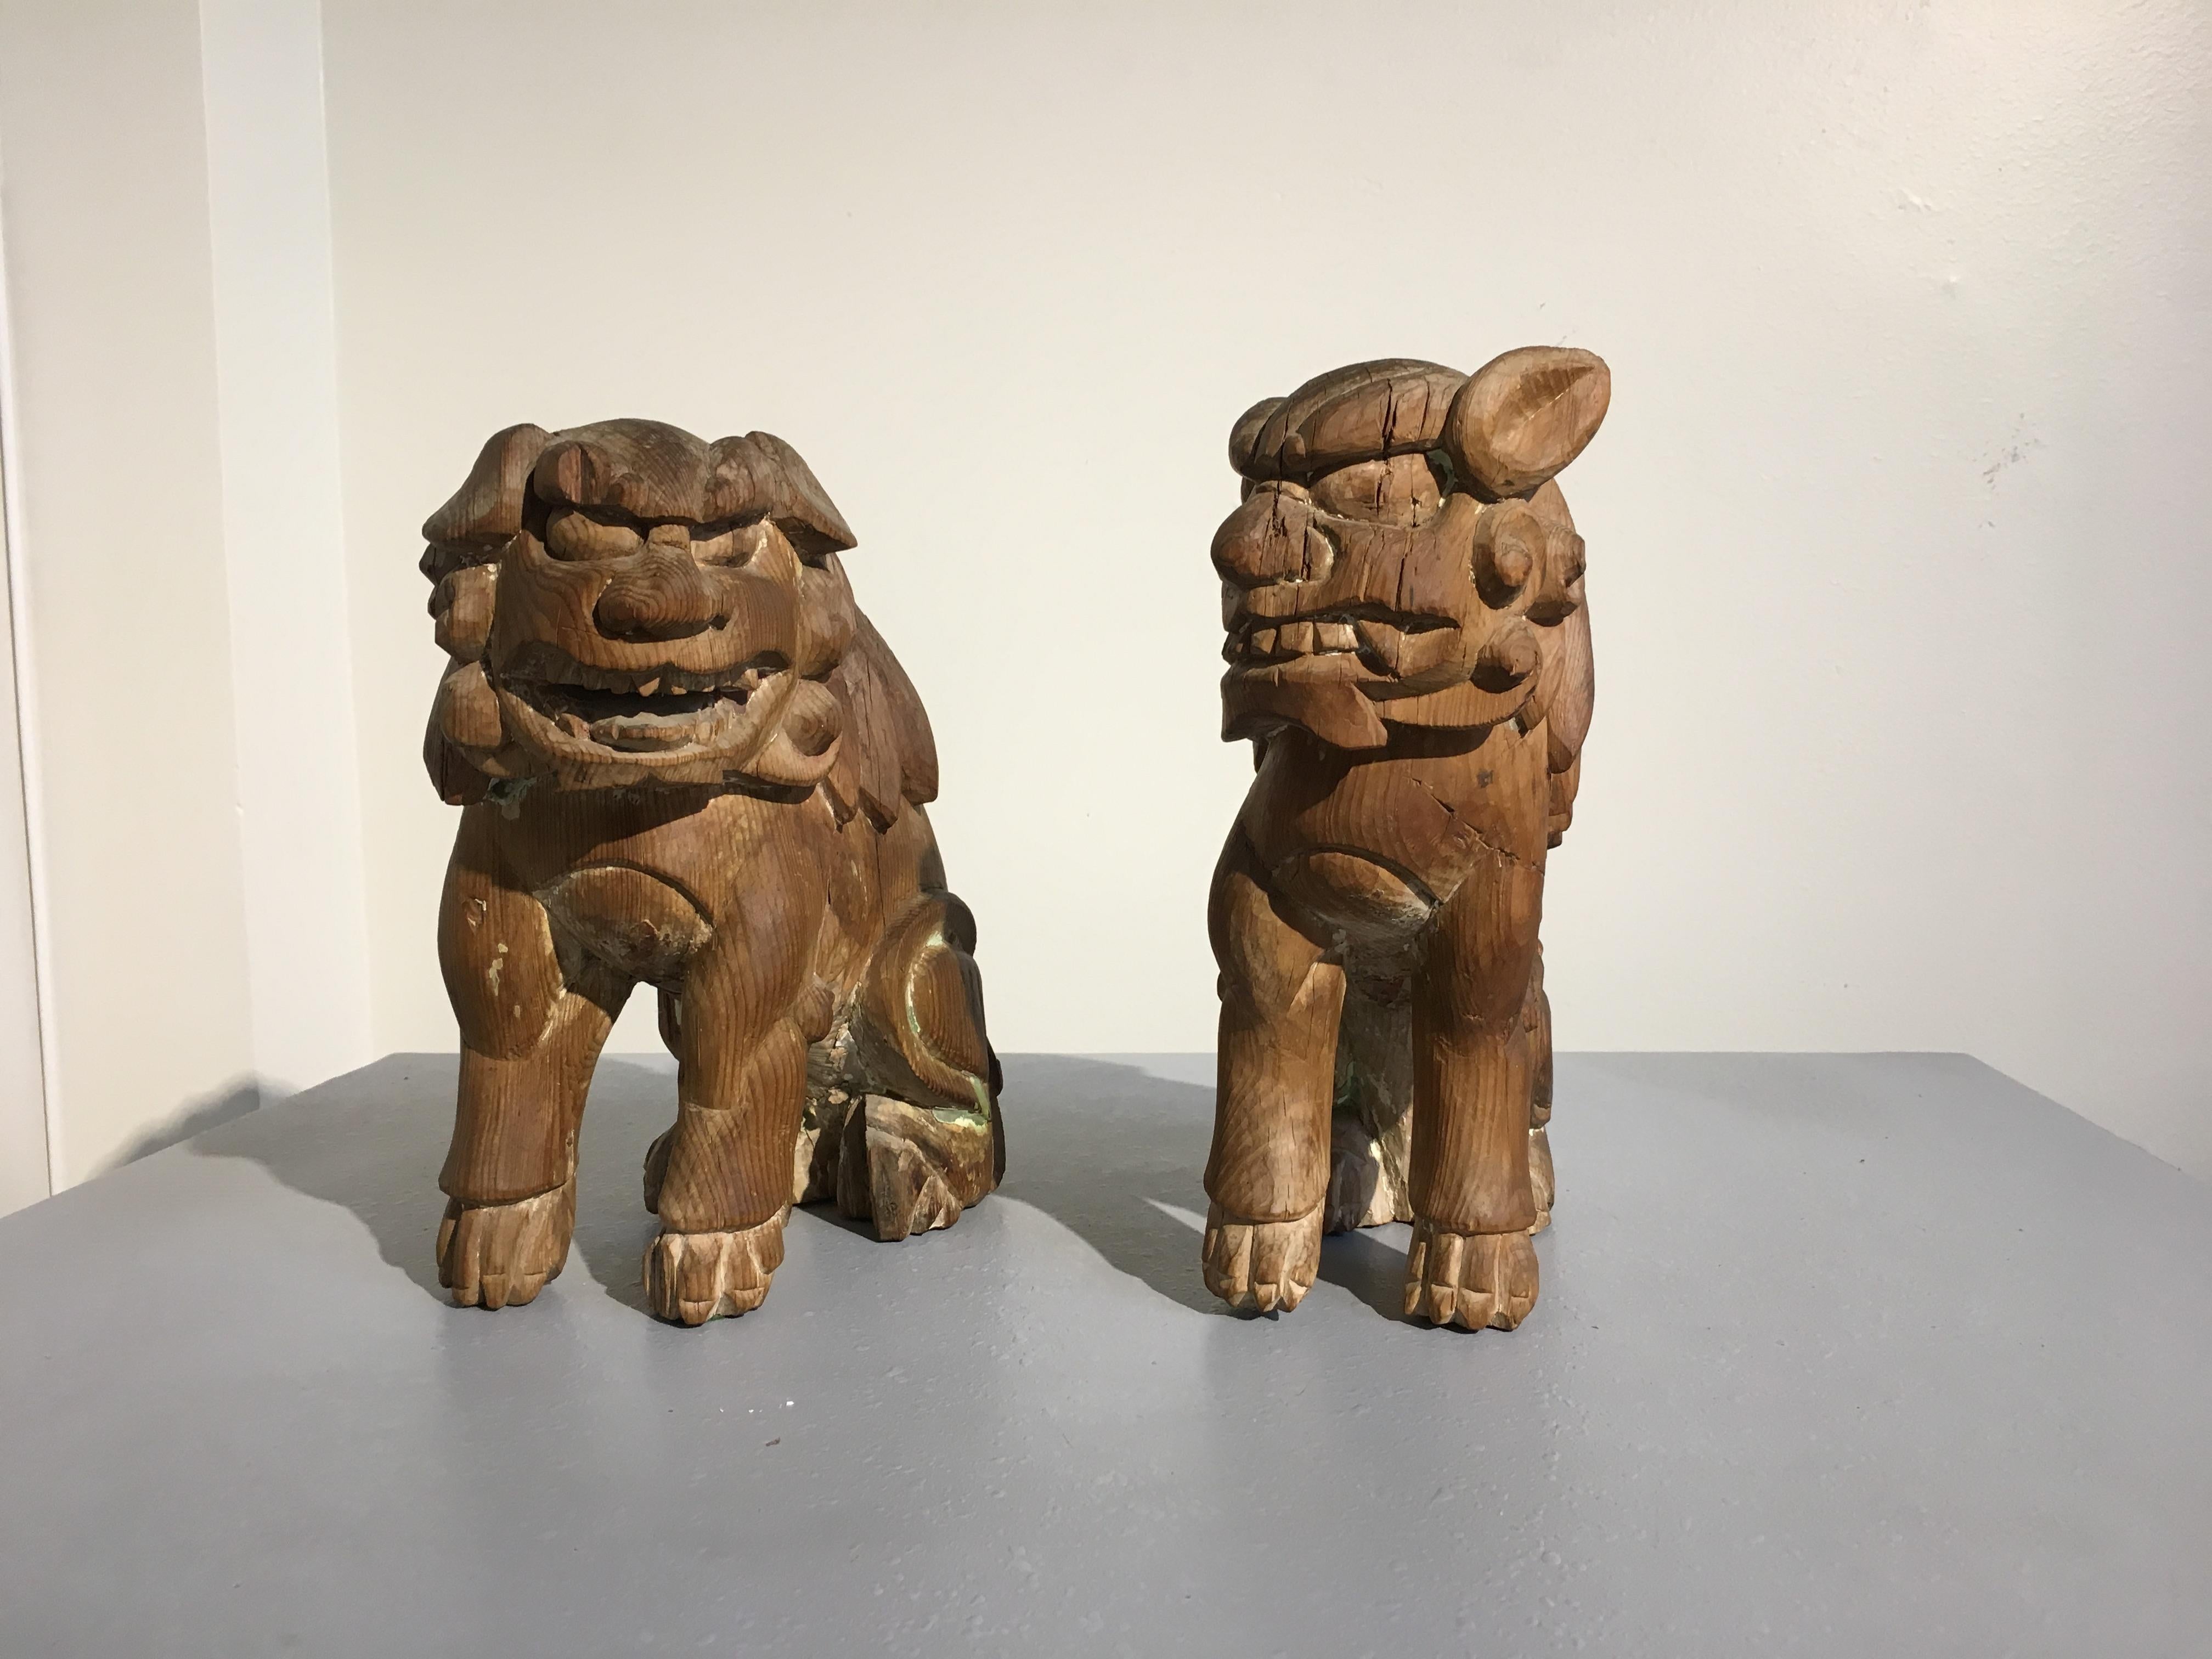 Hand-Carved Japanese Edo Period Carved Wood Foo Lion Dogs, Komainu, Early 19th Century, Pair